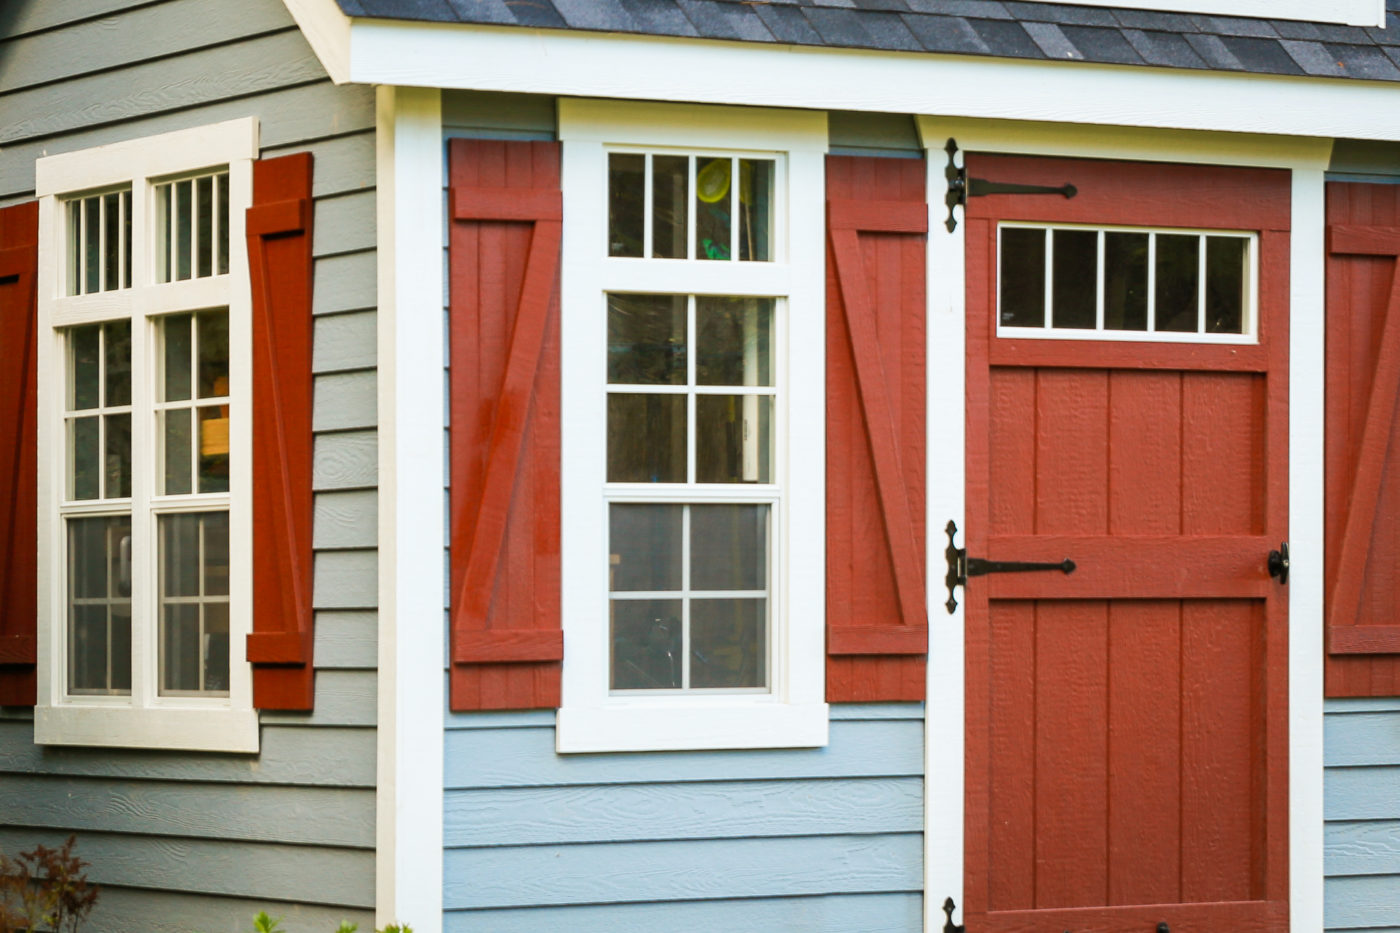 A shed with clapboard siding